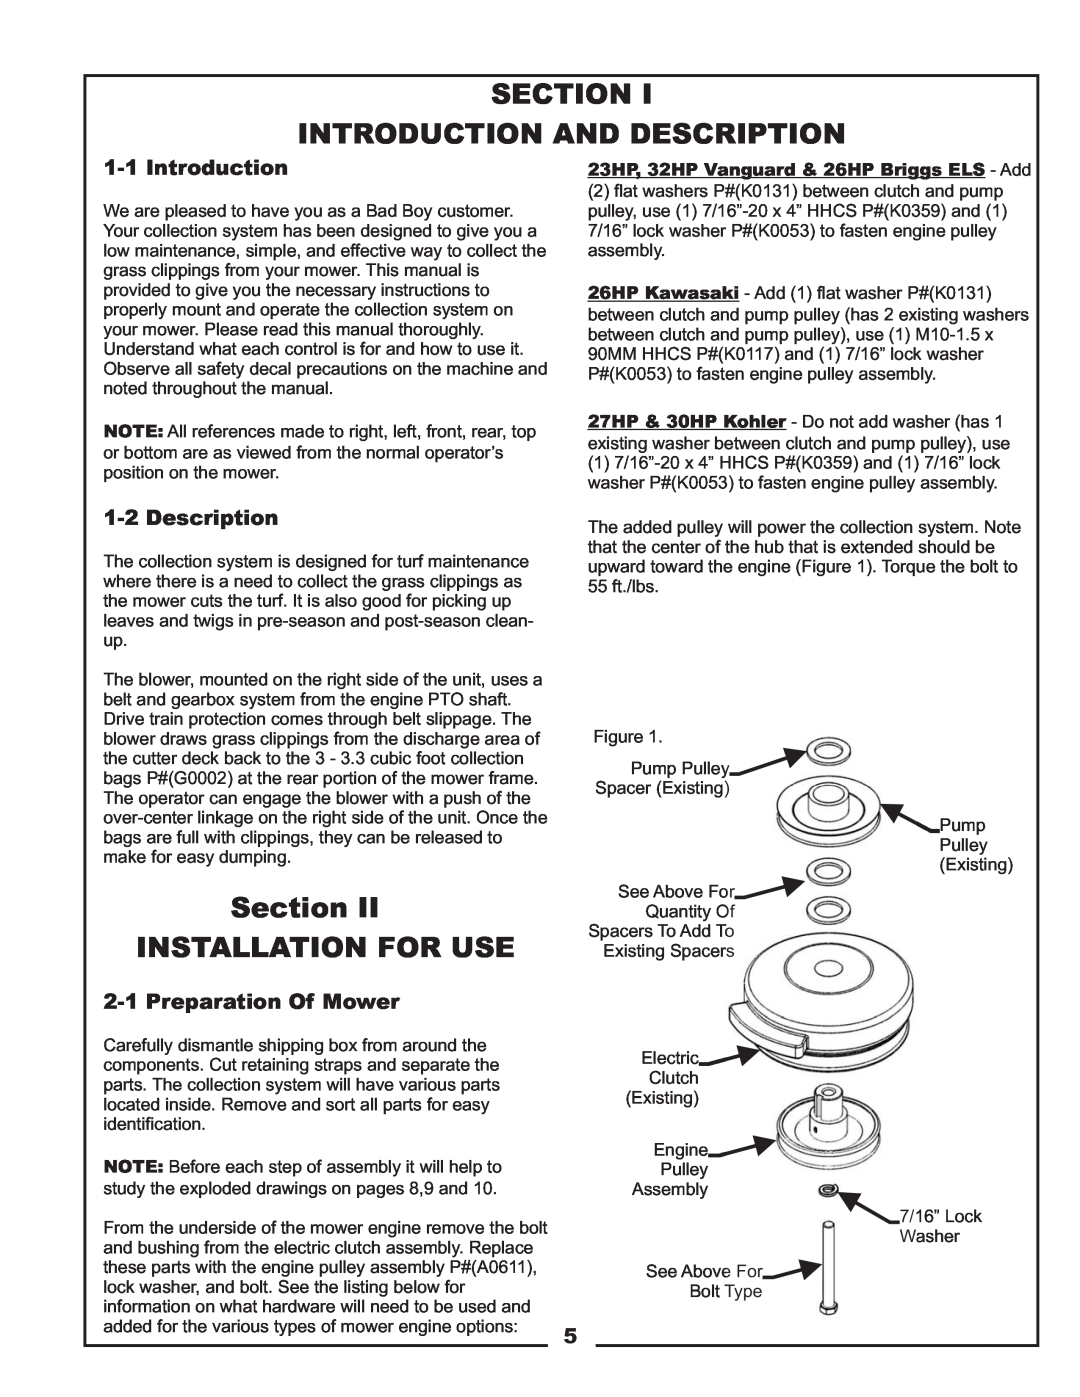 Bad Boy Mowers 48031301 manual Section Introduction And Description, Section II INSTALLATION FOR USE, 1-1Introduction 